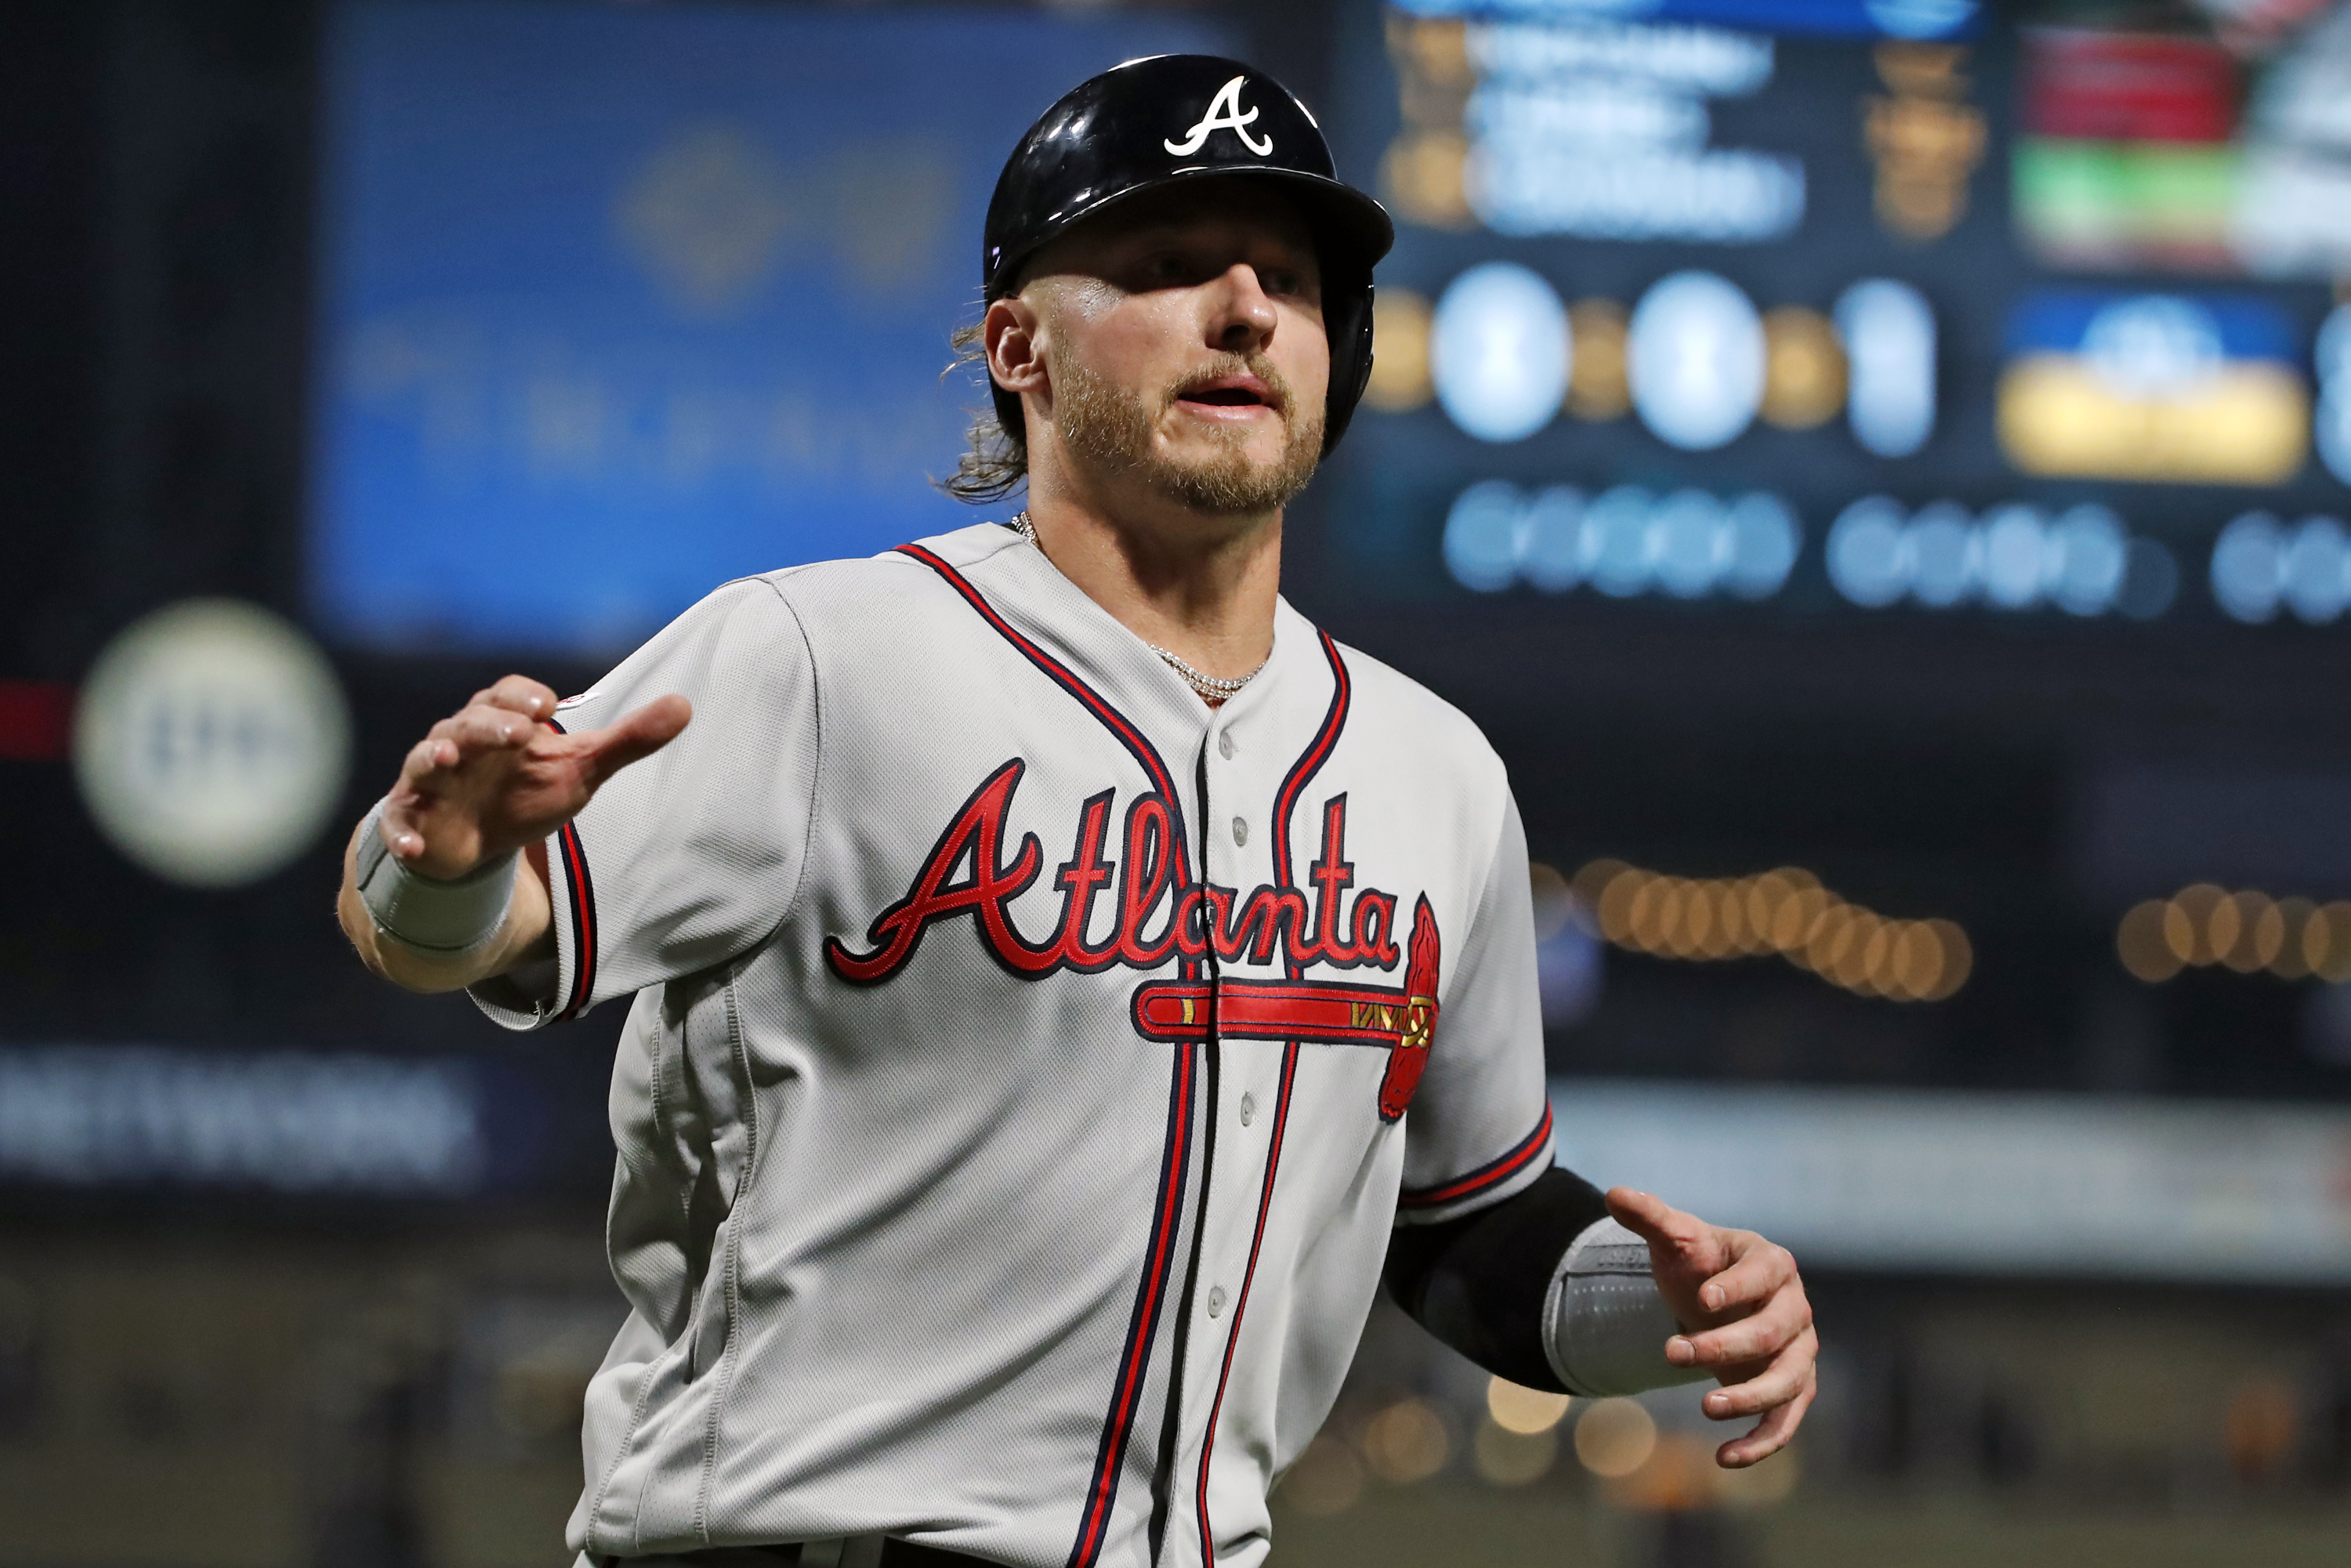 Braves' Josh Donaldson voted NL Comeback Player of the Year